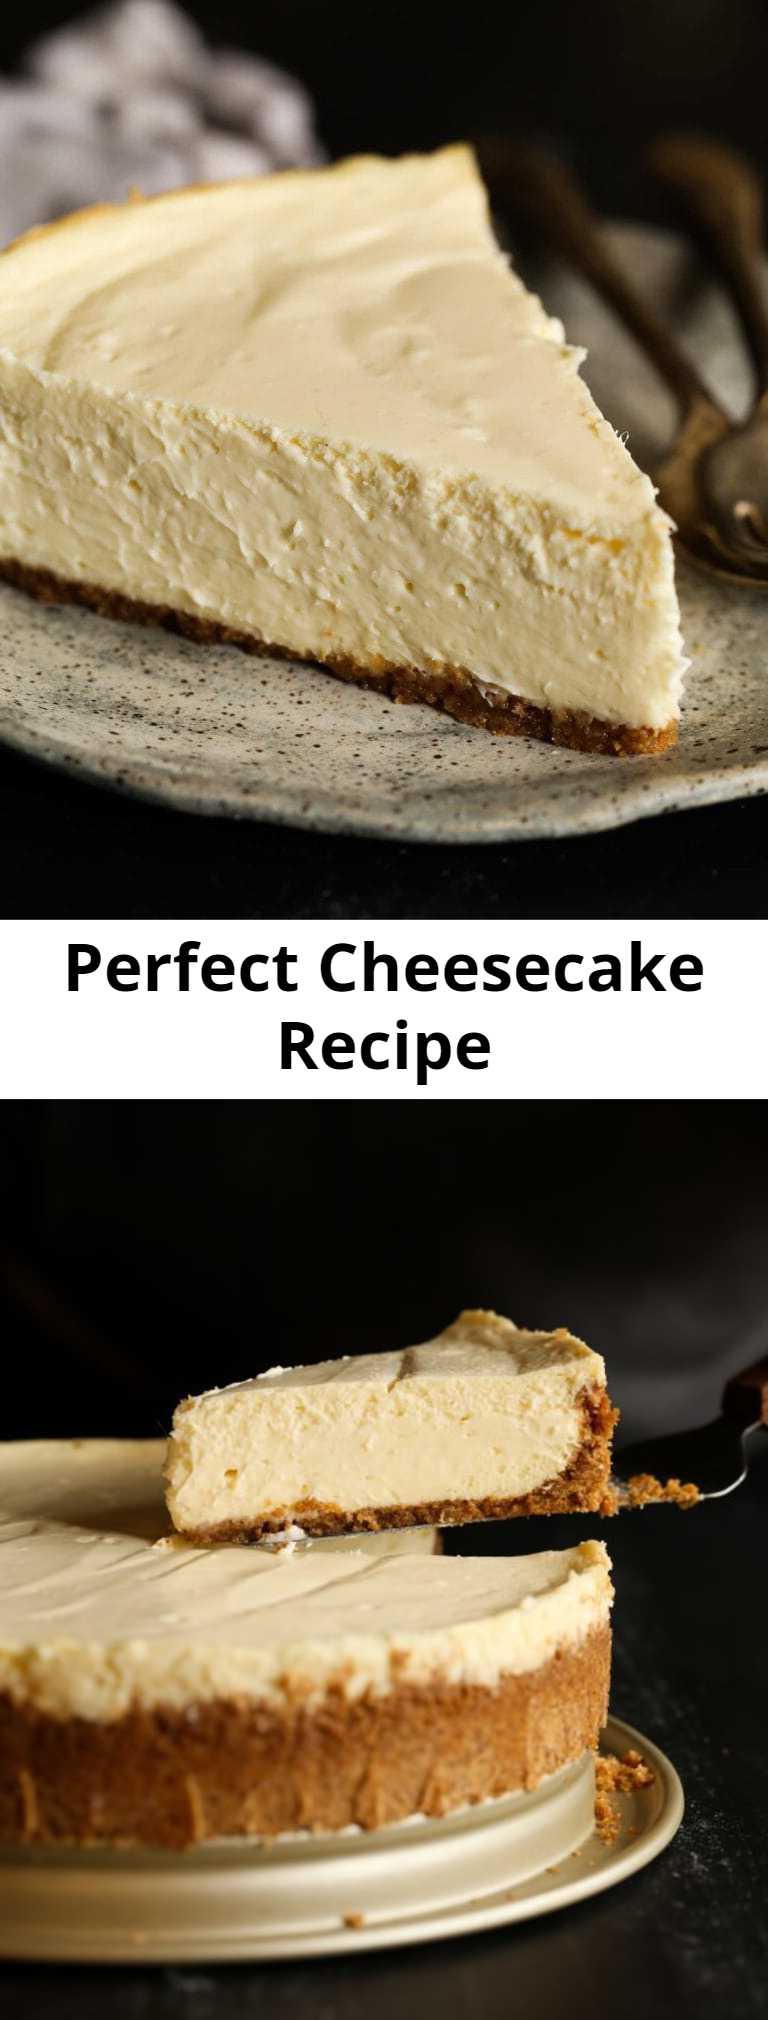 Perfect Cheesecake Recipe - This Classic Cheesecake Recipe makes perfect cheesecake every time! It doesn’t get much better than creamy, smooth cheesecake baked in a homemade graham cracker crust.